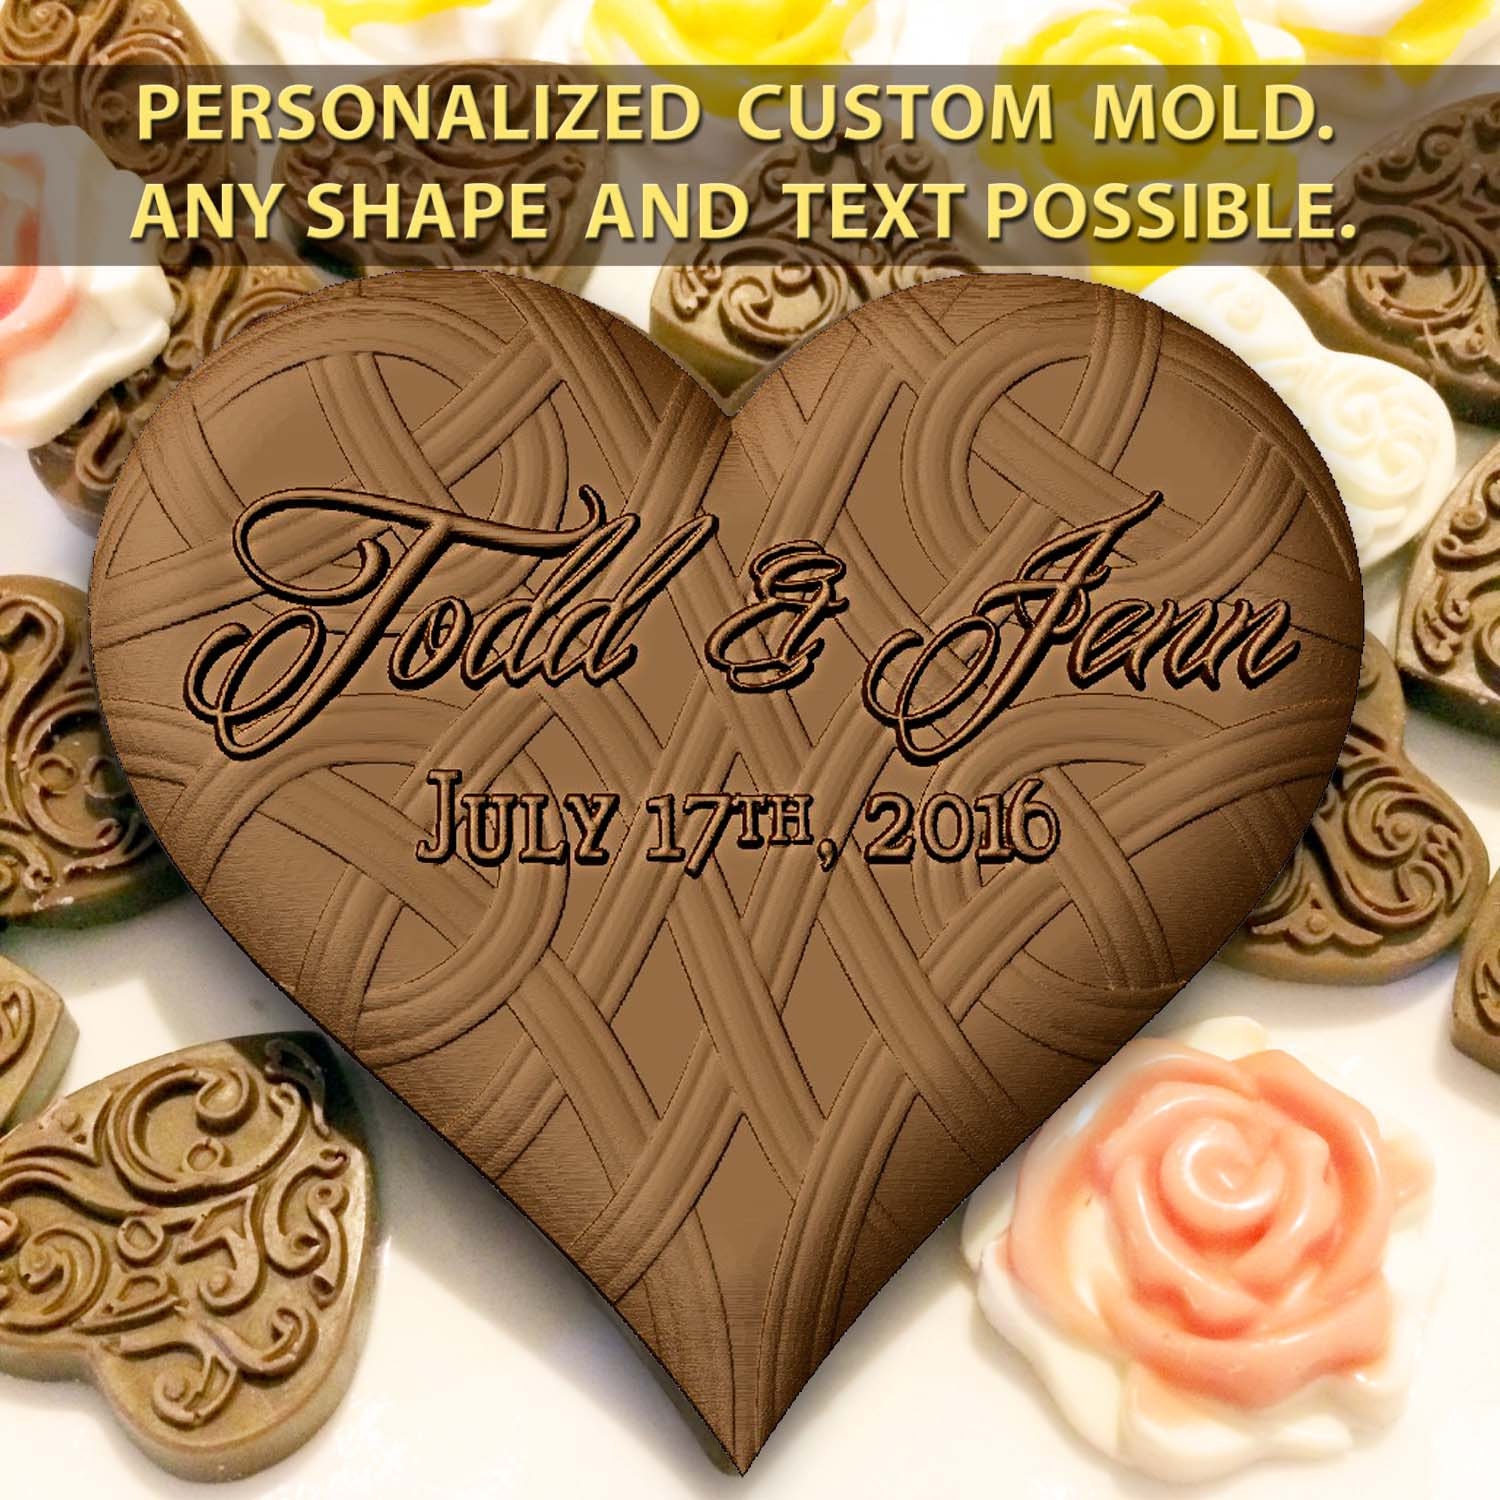 Heart Swirl Candy Mold / Wedding Heart Mold / Bite Size Heart Mold /  Chocolate Candy Molds / Heart Candy Mold For Cupcake Toppers